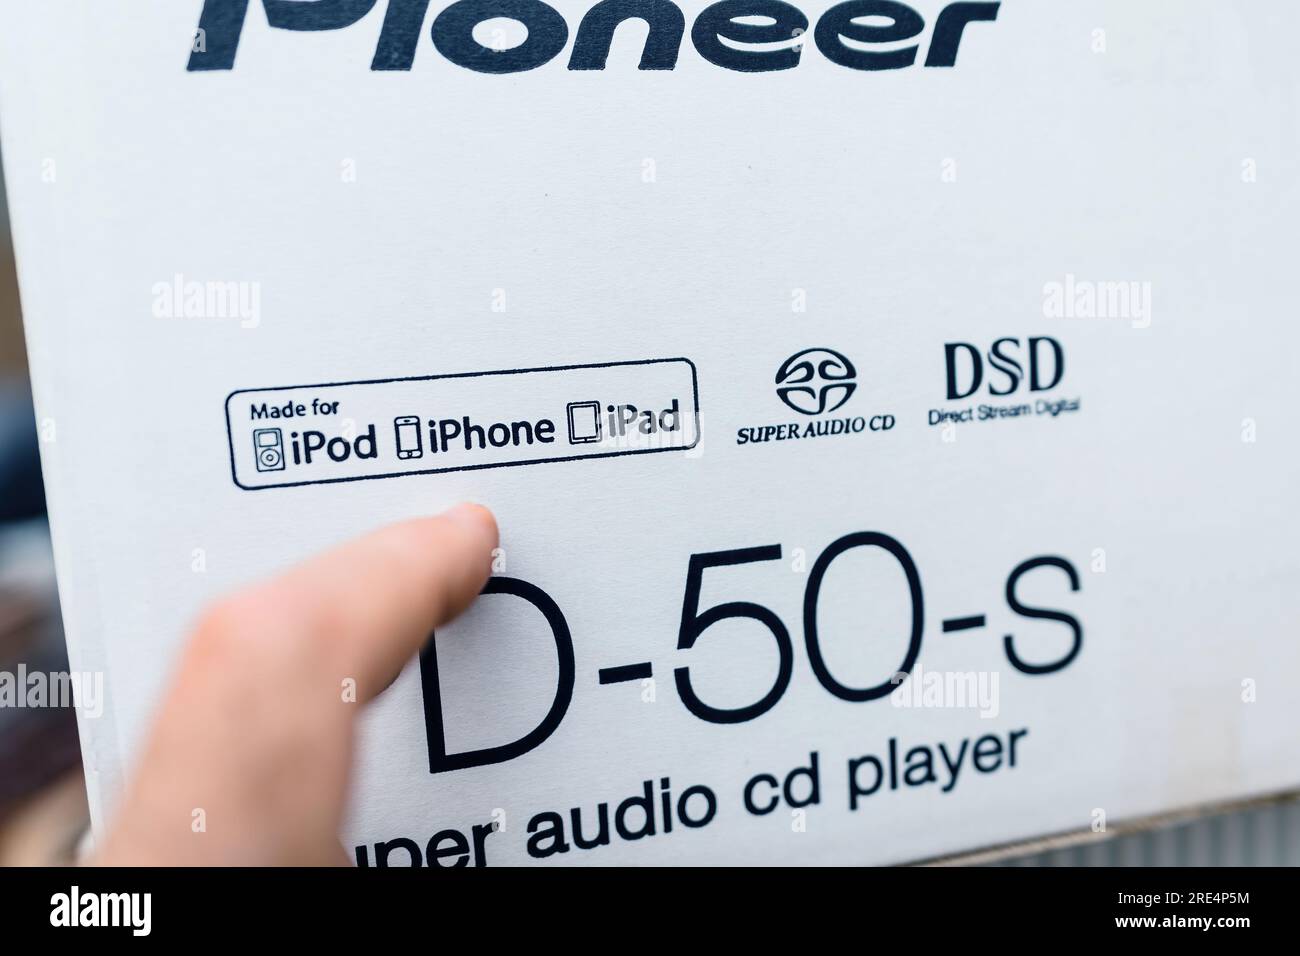 Hamburg, Germany - Jul 24, 2023: Male hand pointing to the Made for iPod iPhone iPad logotype on the new Pioneer PD-50-2 super audio cd SACD player for hifi musicality and audition Stock Photo